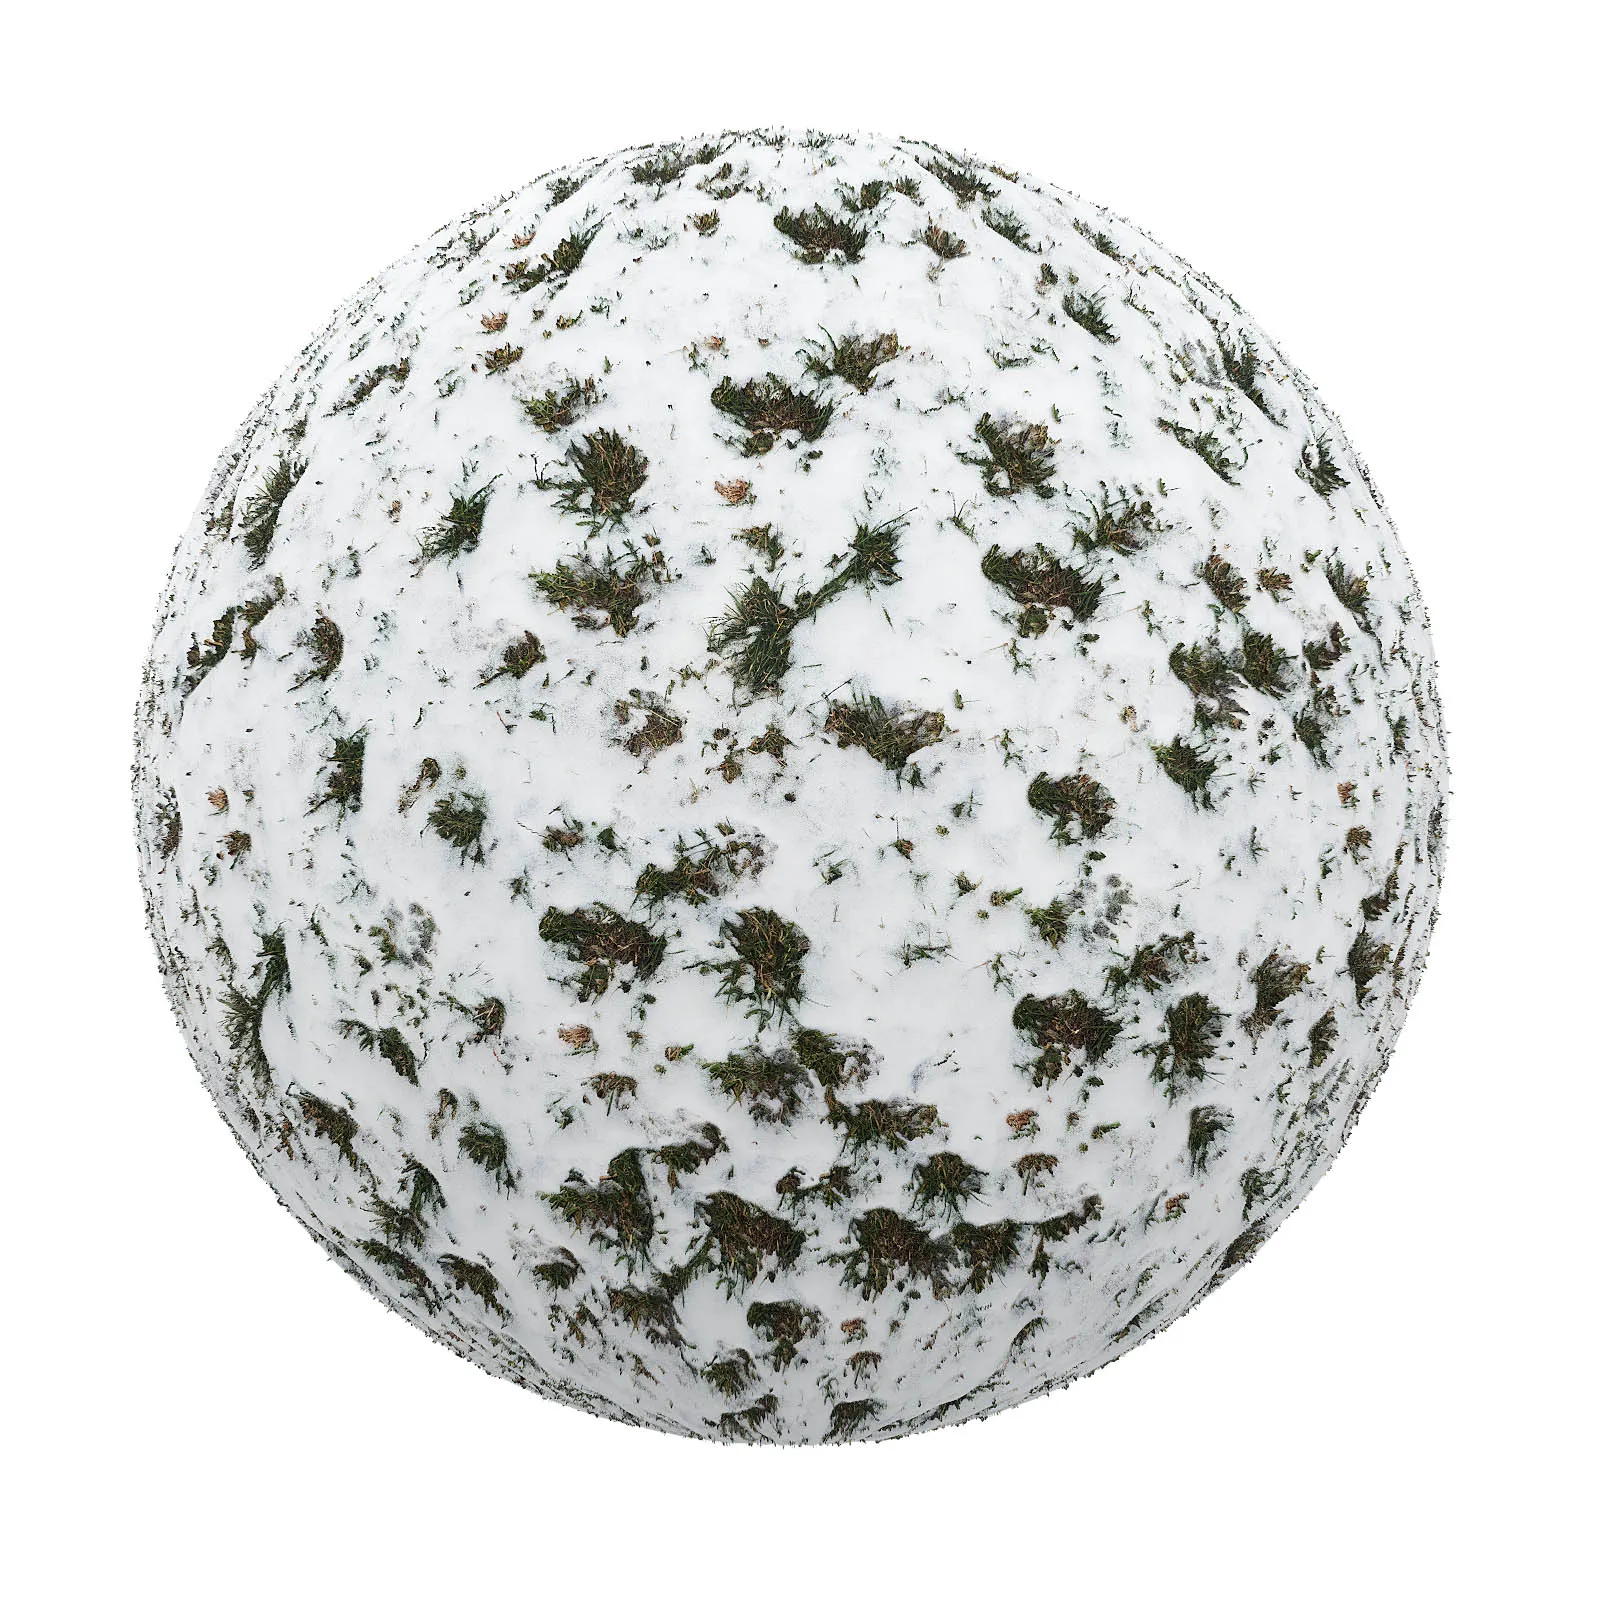 PBR CGAXIS TEXTURES – SNOW – Snow Covering Grass 11